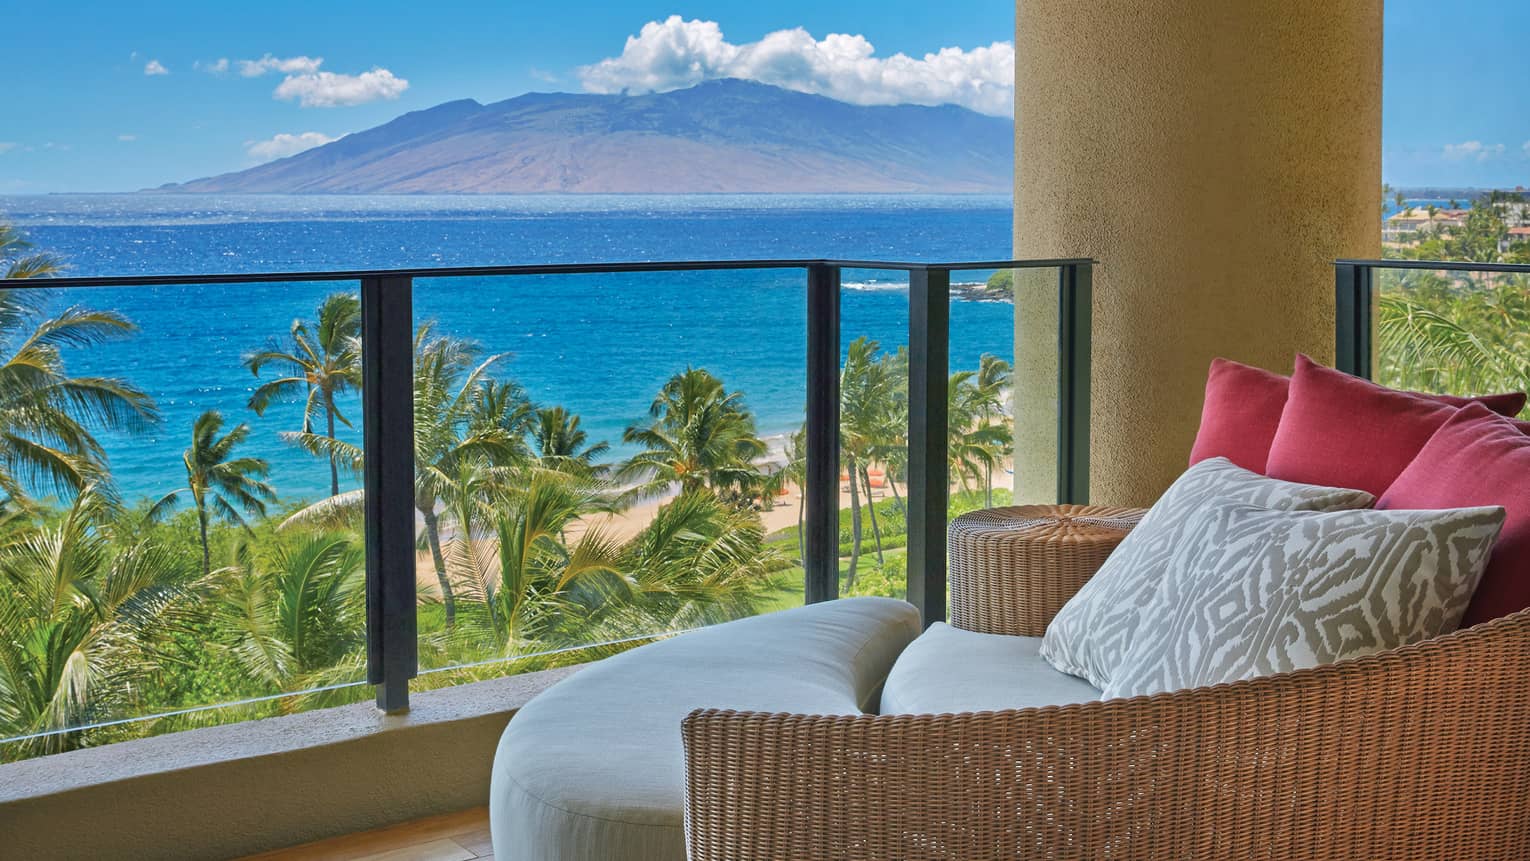 Maile Suite private terrace overlooking the ocean and the mountains